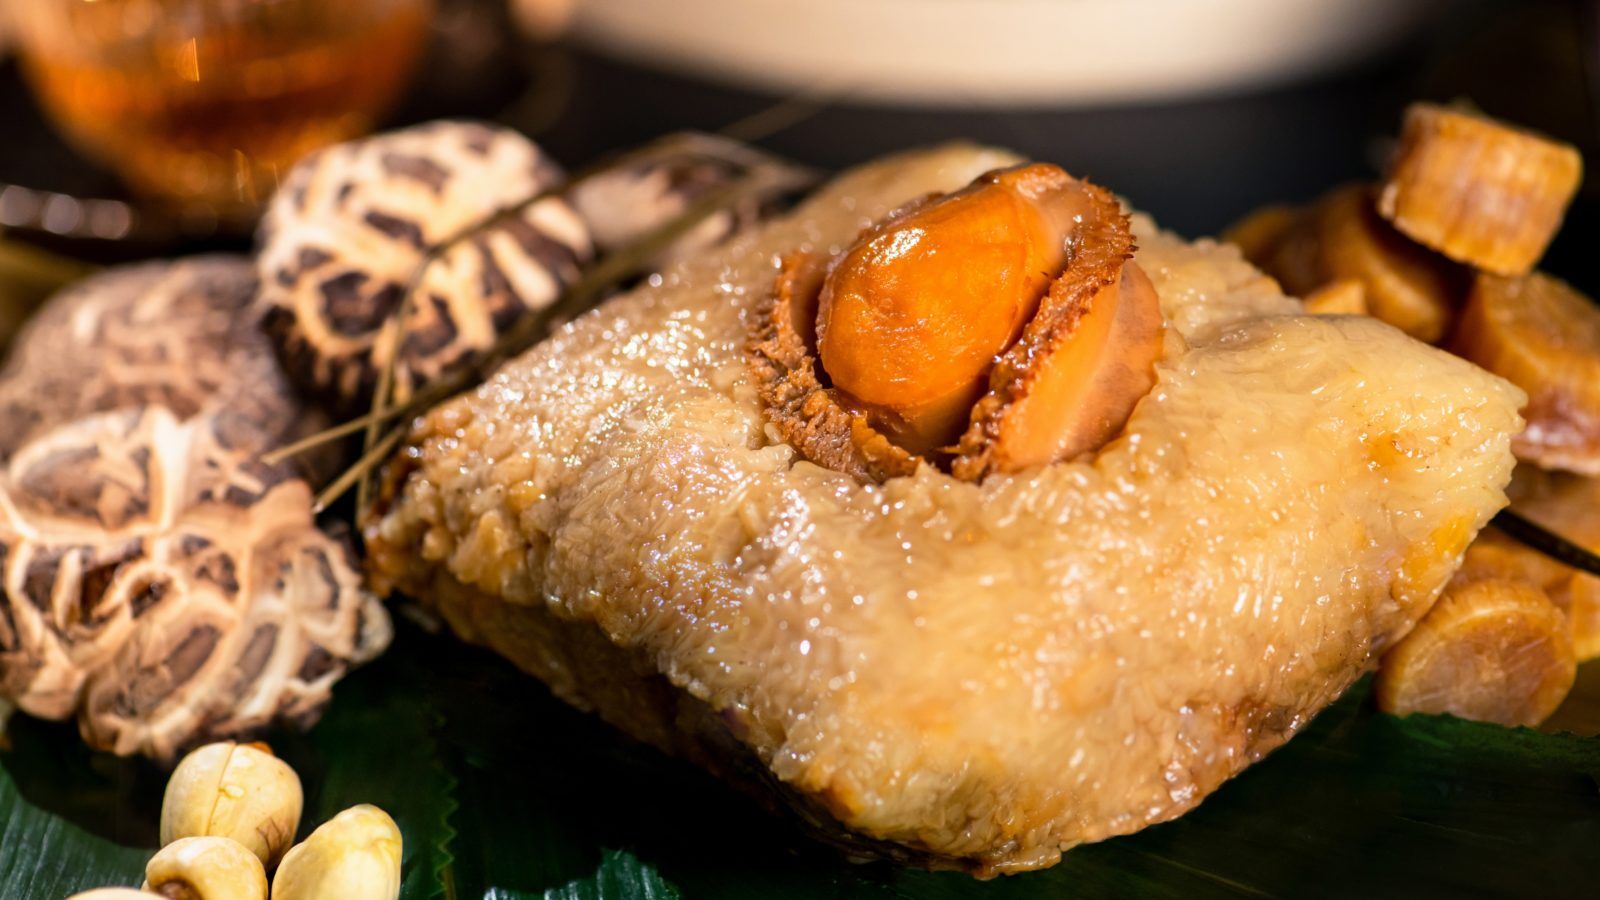 Where to get last-minute sticky rice dumplings for Dragon Boat Festival 2022